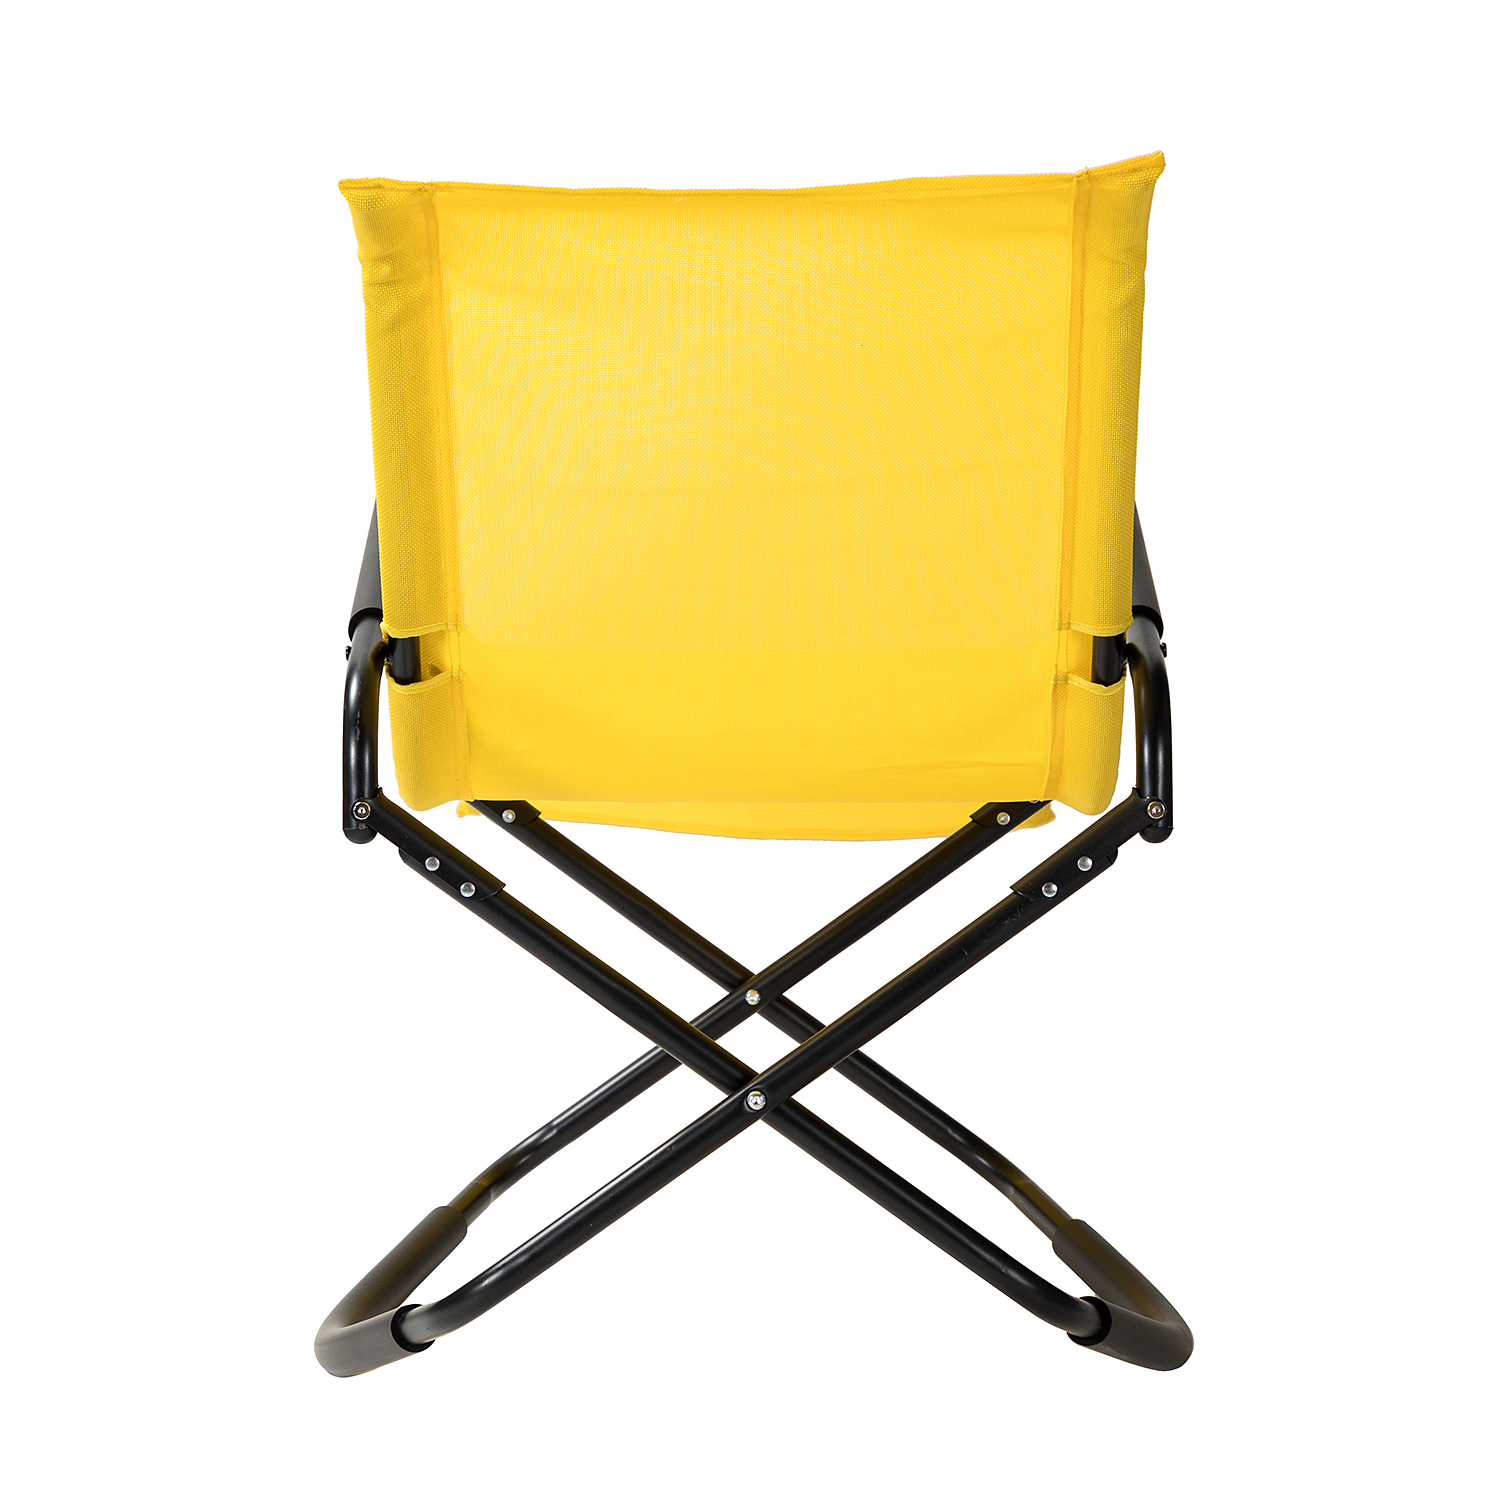 Camping Rocking Chair, Outdoor Folding Lounge Chaise Chair, Portable Beach Chair with Armrests, Folding Lounge Chair, Patio Reclining Lounge Chair for Pool, Garden, Lawn, Deck, D7841 - image 4 of 9